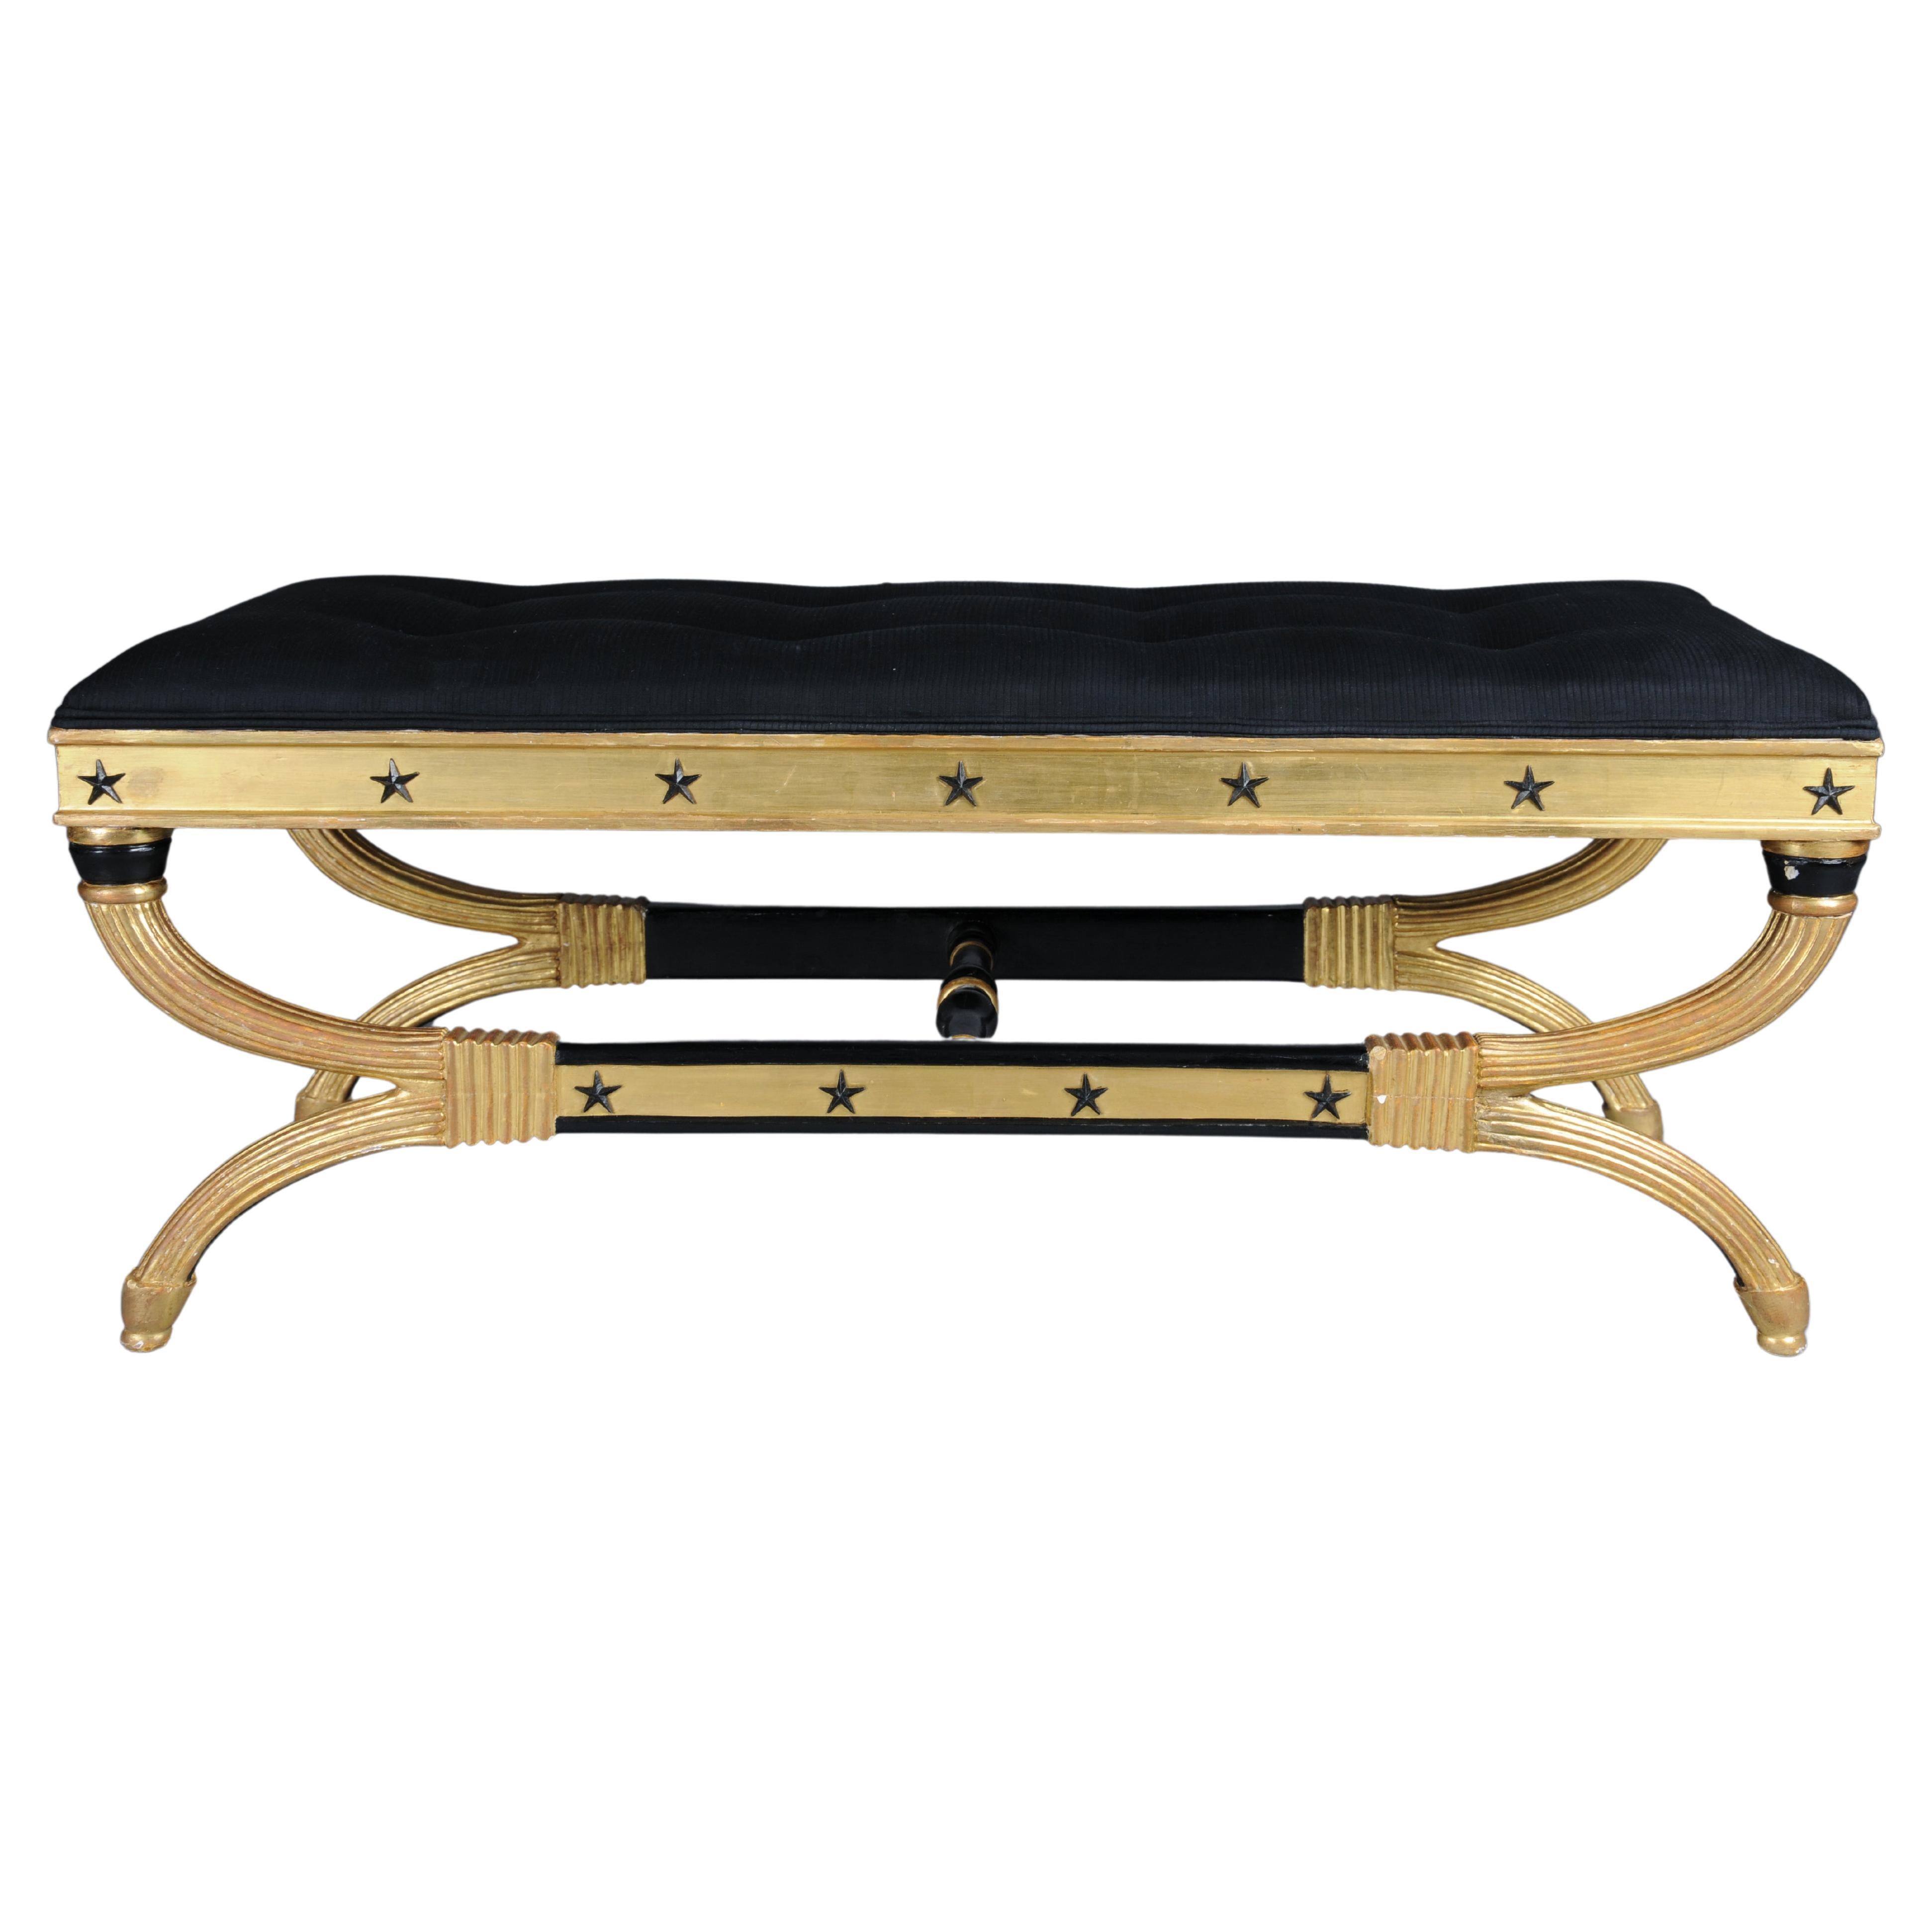 Royal Empire bench, gold-plated, black

Solid beech wood, gilded with black decorative elements.
Straight frame with black stars and base.
Curved base frame, partially grooved, connected to a central bar. Seat upholstery made from black high-quality